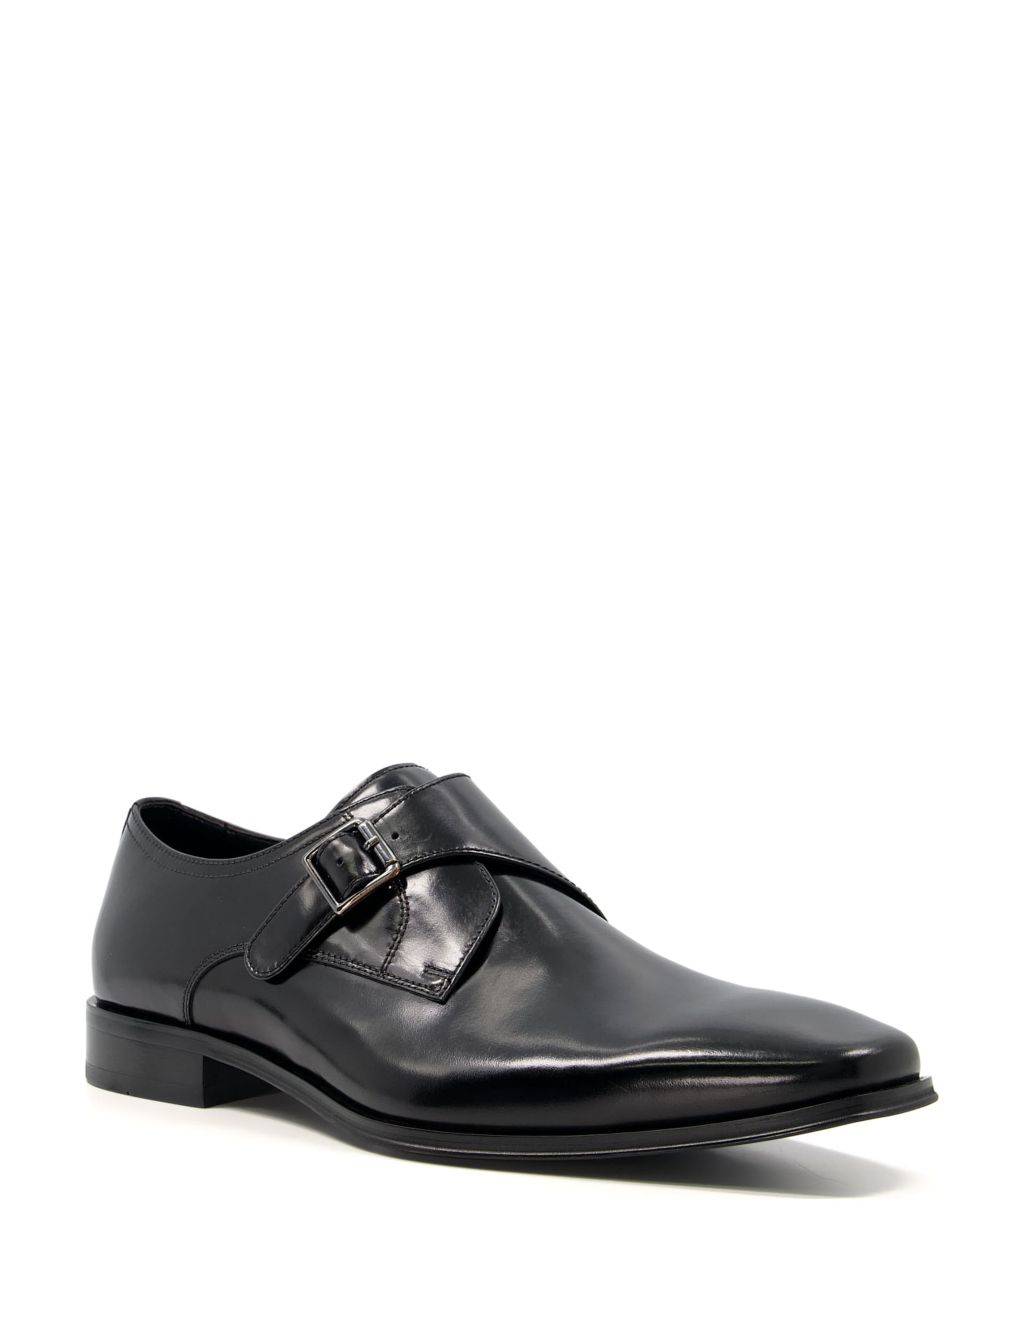 Leather Monk Strap Shoes image 2